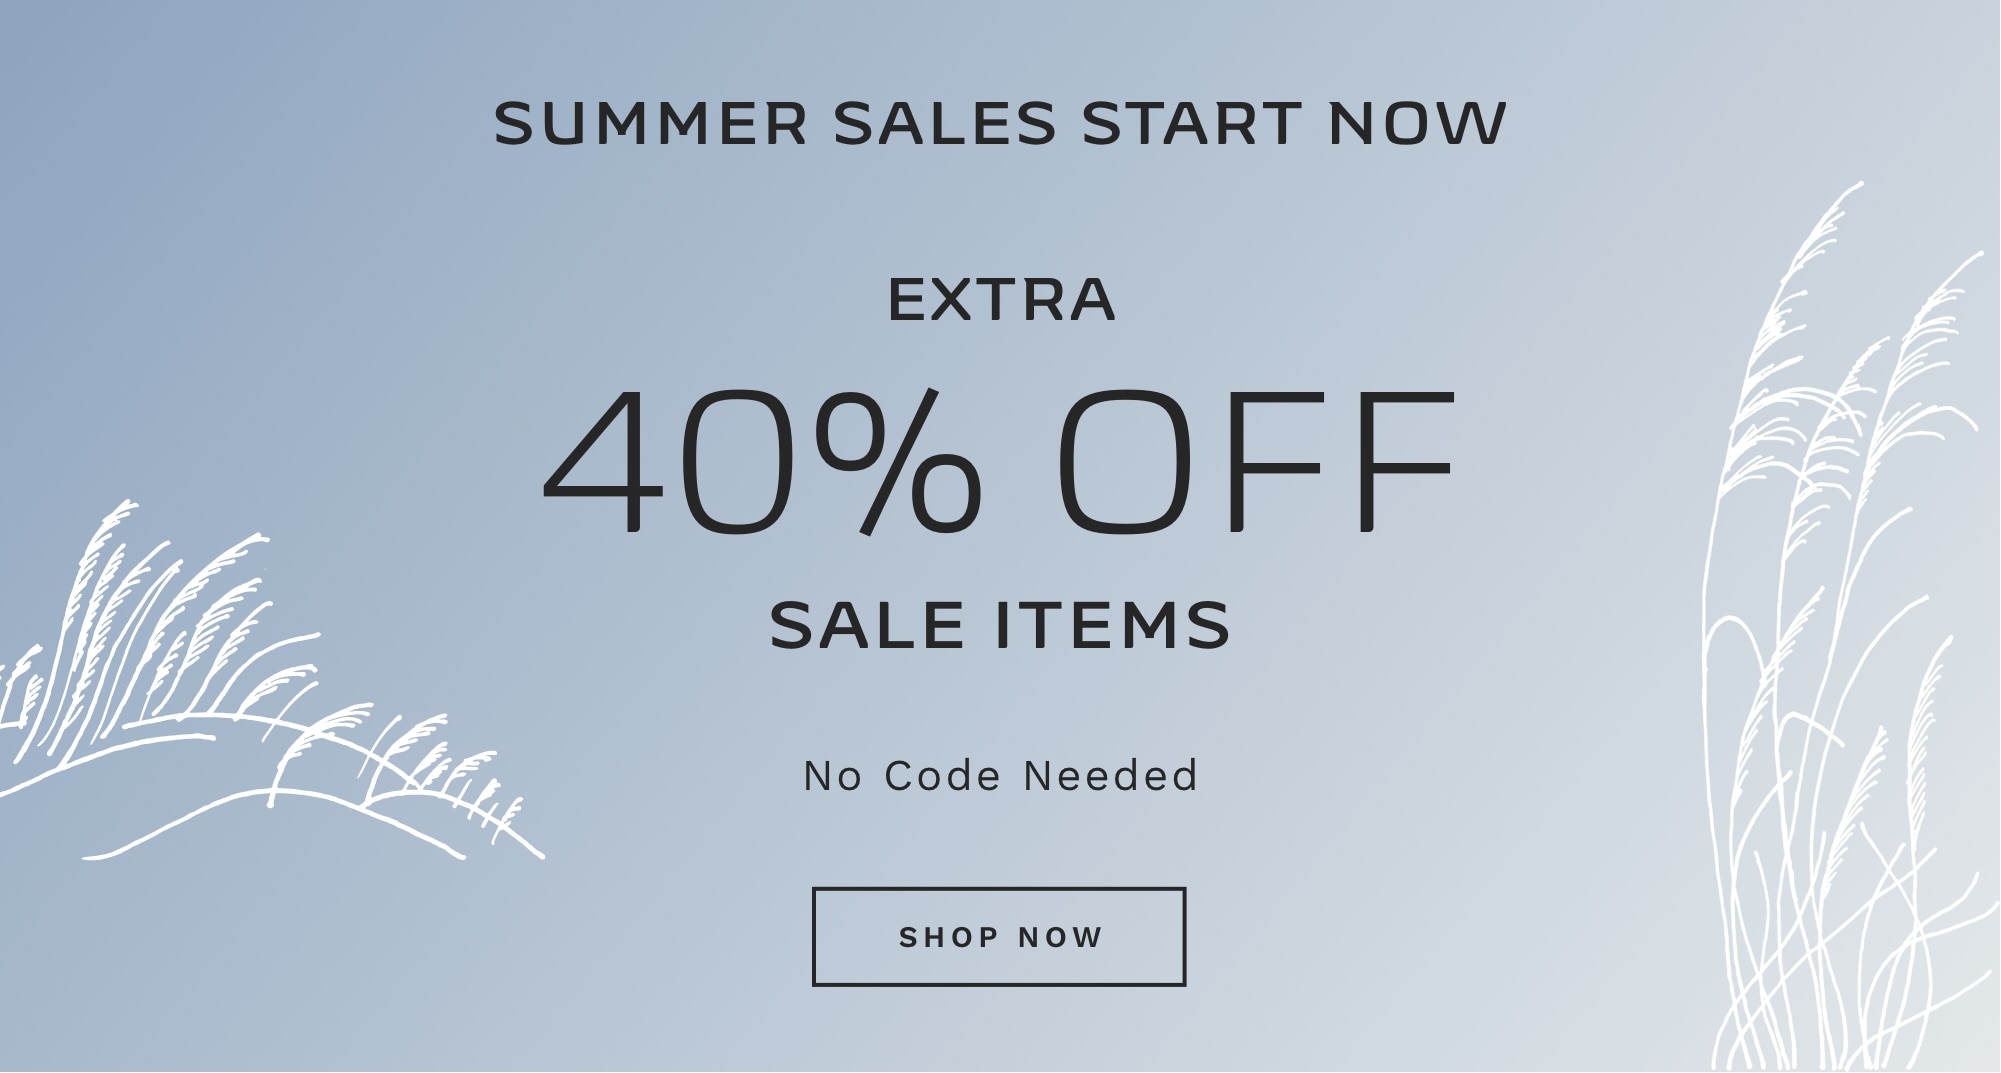 SUMMER SALES START NOW EXTRA 40% OFF SALE ITEMS No Code Needed SHOP NOW